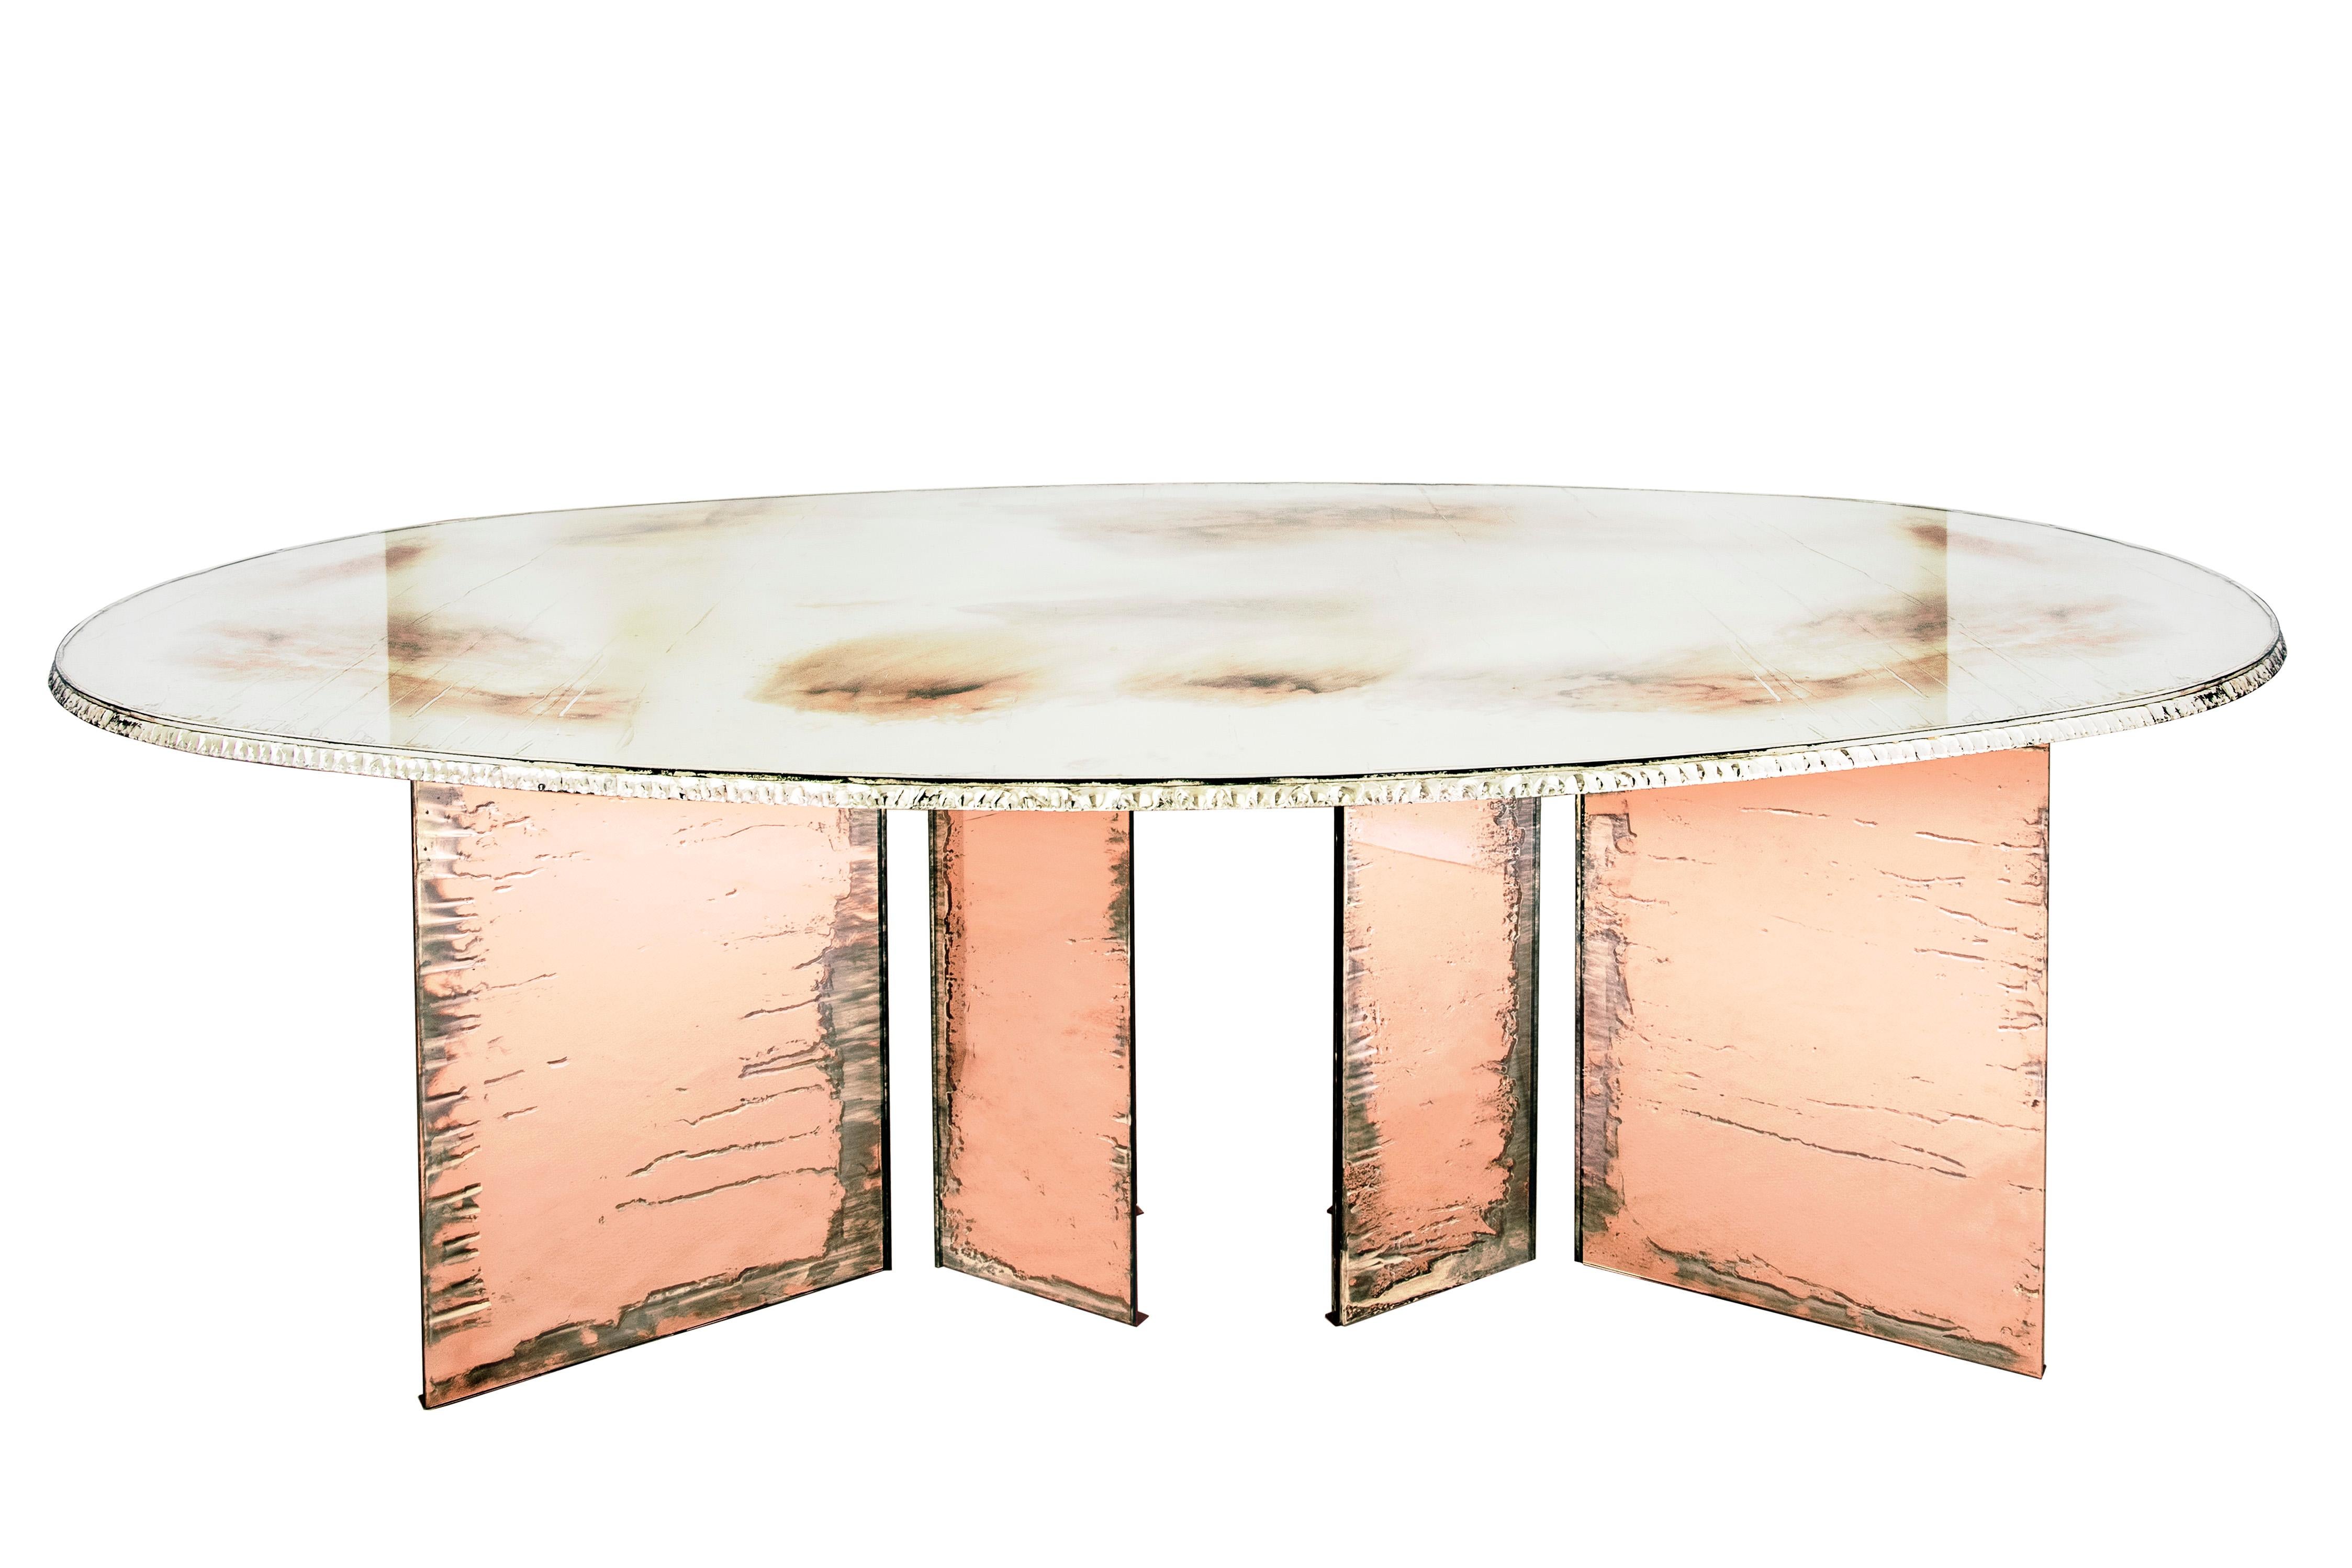 Art Glass Flight Contemporary Low-Coffee Table, 120x80cm Rose Glass Legs, Silvered Glass